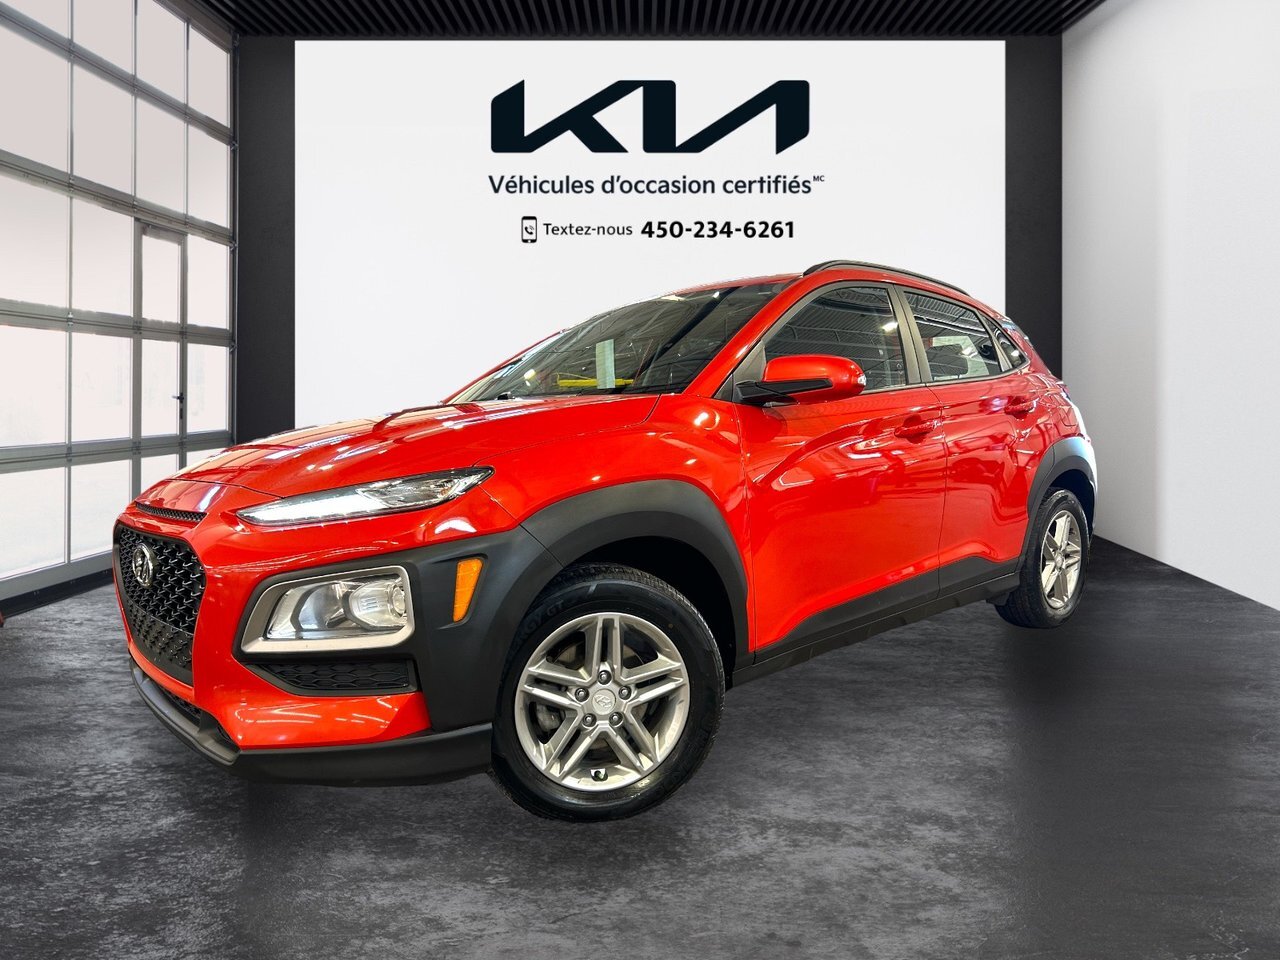 2019 Hyundai Kona Essential, AUCUN ACCIDENT, ANDROID AUTO, MAGS ICI 